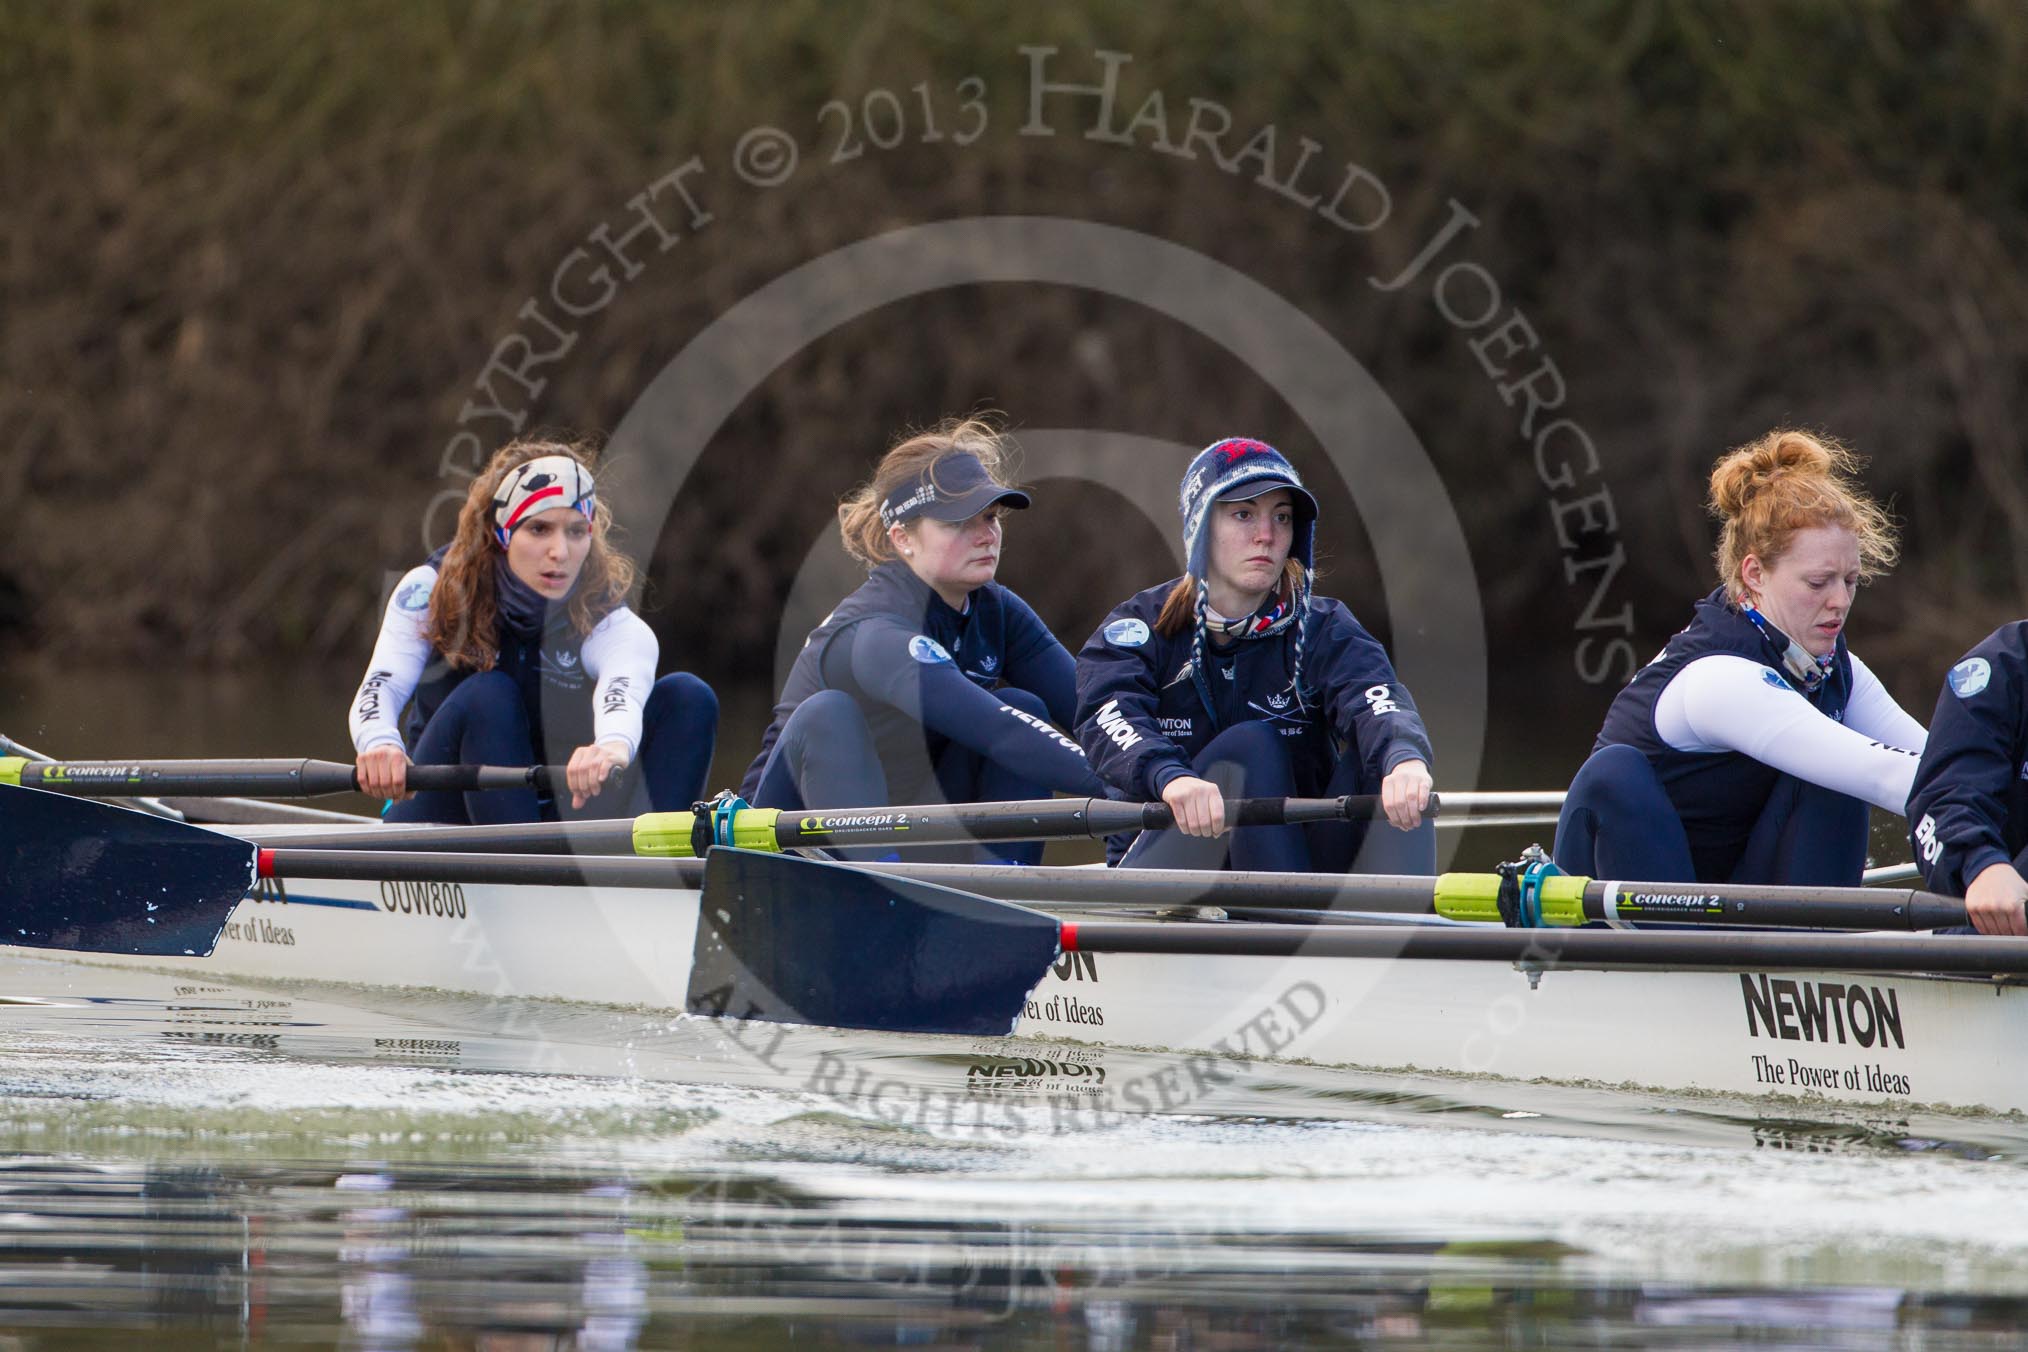 The Boat Race season 2013 - OUWBC training: At the bow of Osiris, the OUWBC reserve boat, Coralie Viollet-Djelassi, in the 2 seat Elspeth Cumber, 3 seat Hannah Ledbury, and 4 seat Eleanor Darlington..
River Thames,
Wallingford,
Oxfordshire,
United Kingdom,
on 13 March 2013 at 17:07, image #82